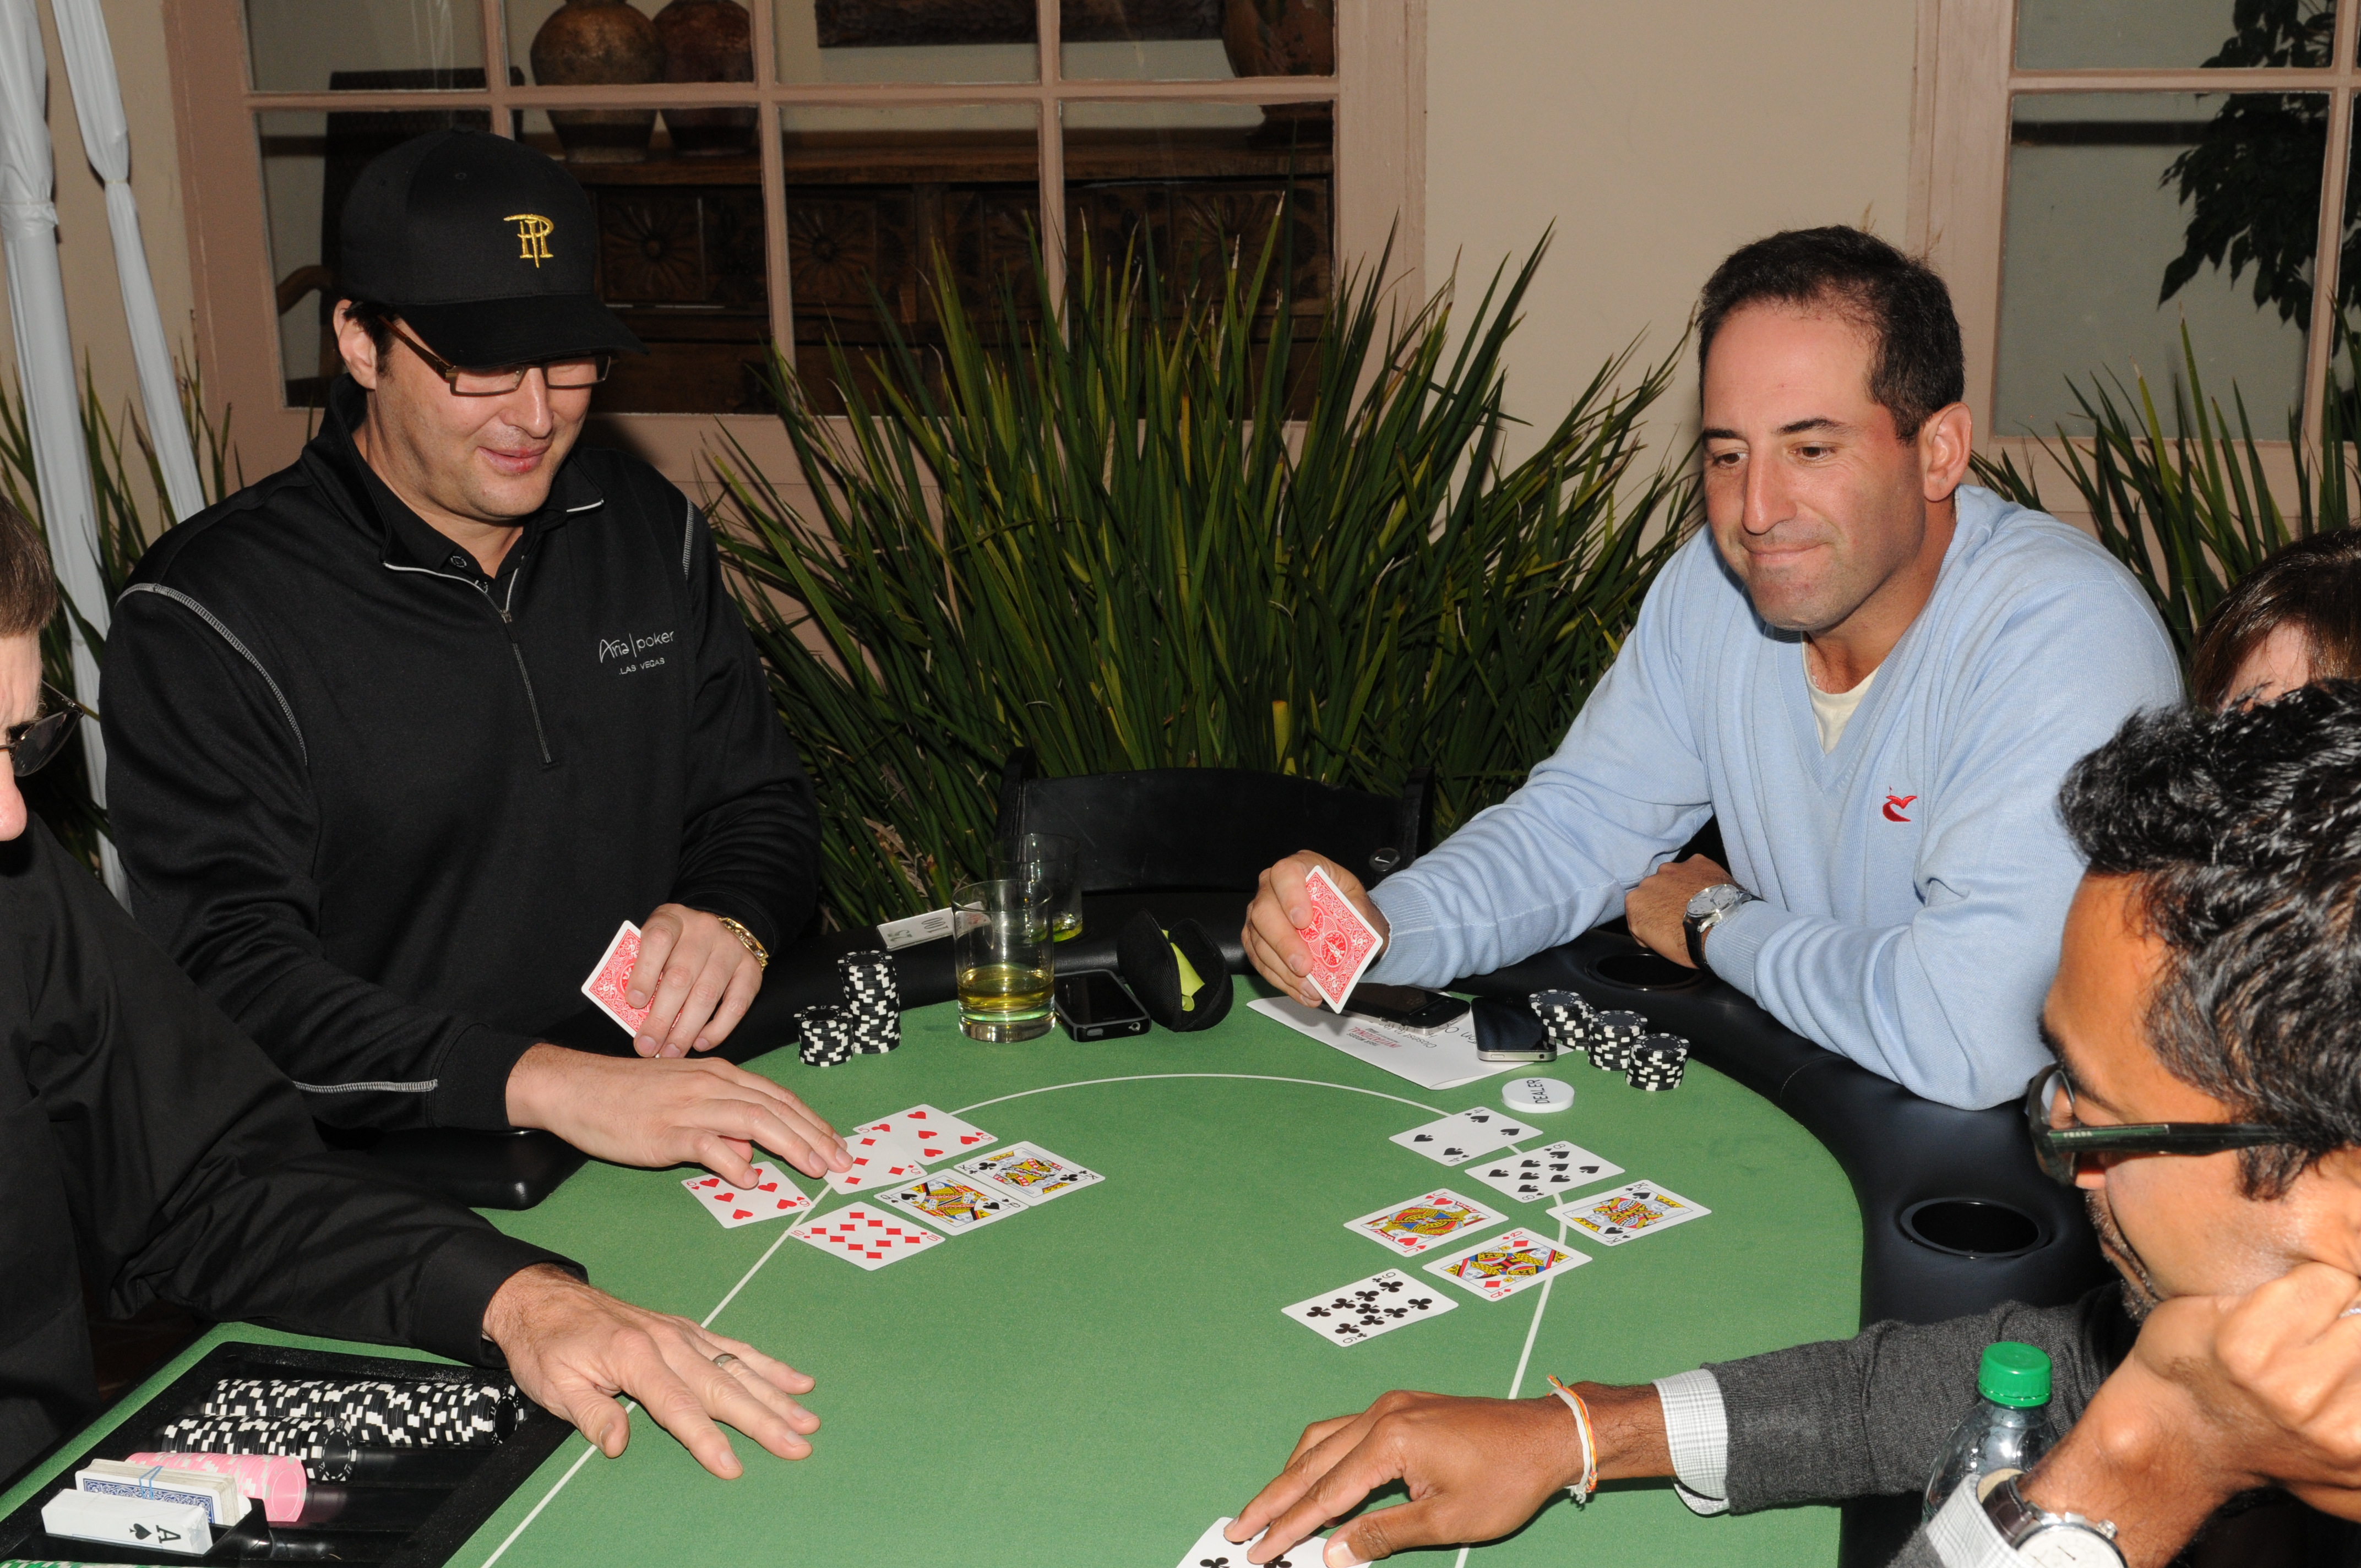 Phil Hellmuth playing poker with TWI guests